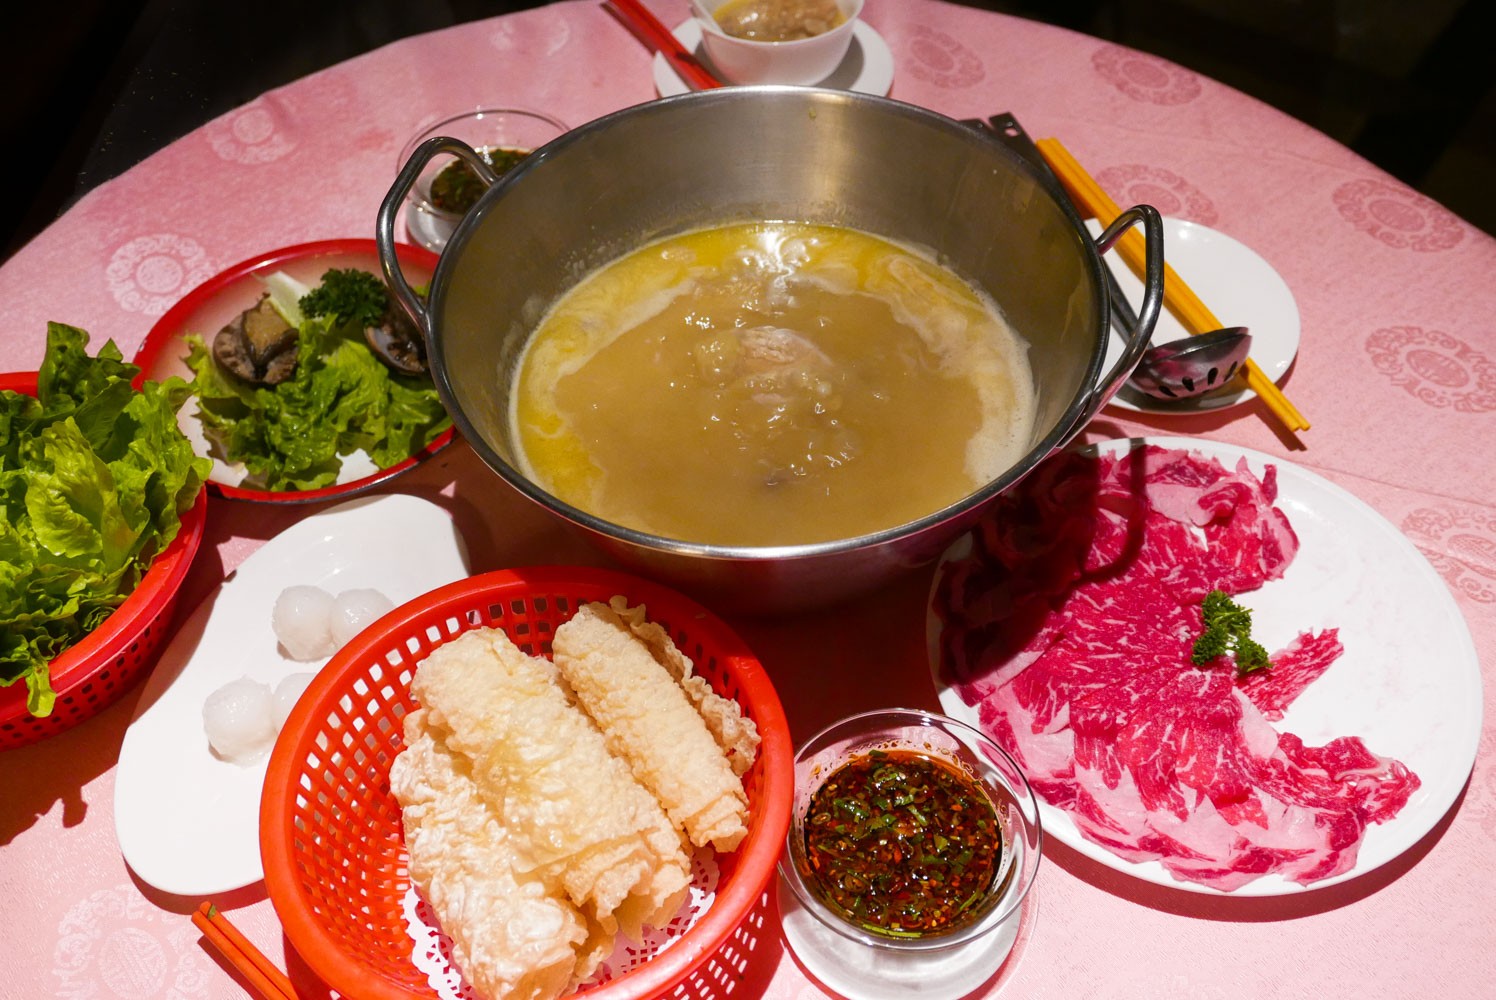 Why Chinese Diners Wait 3 Hours for RMB600 Hot Pot Lou Shang